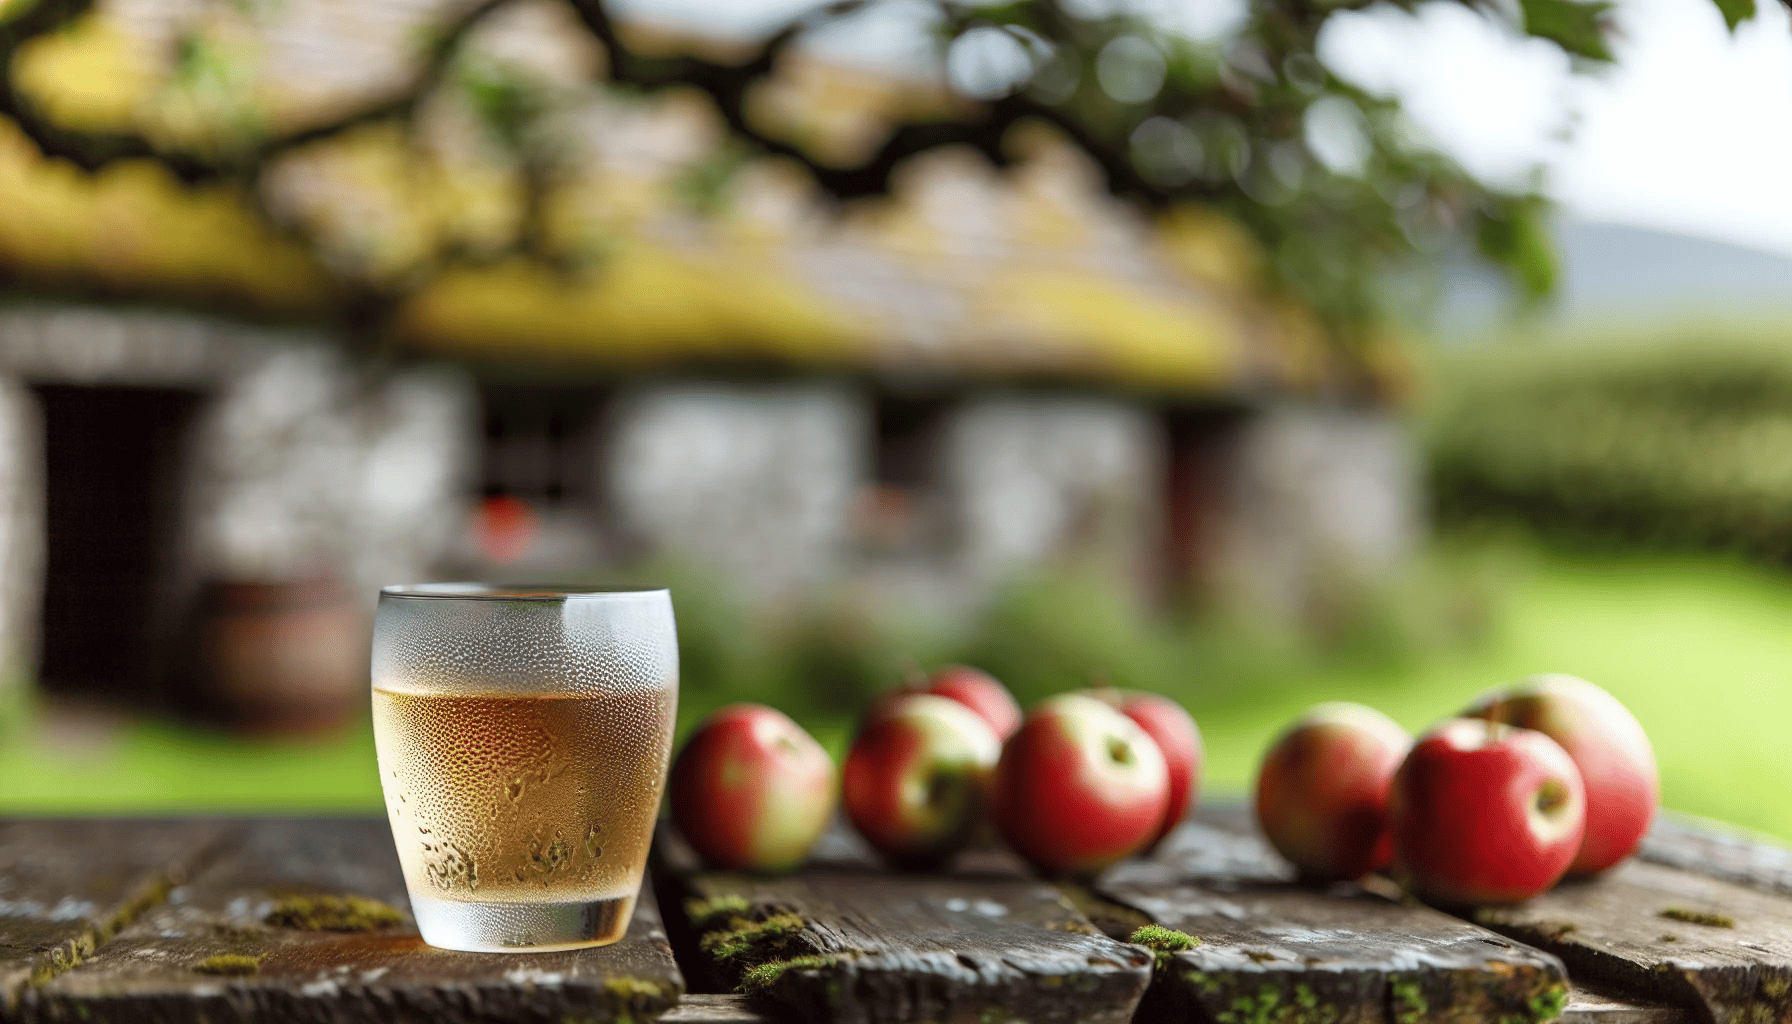 Irish cider served in a rustic setting